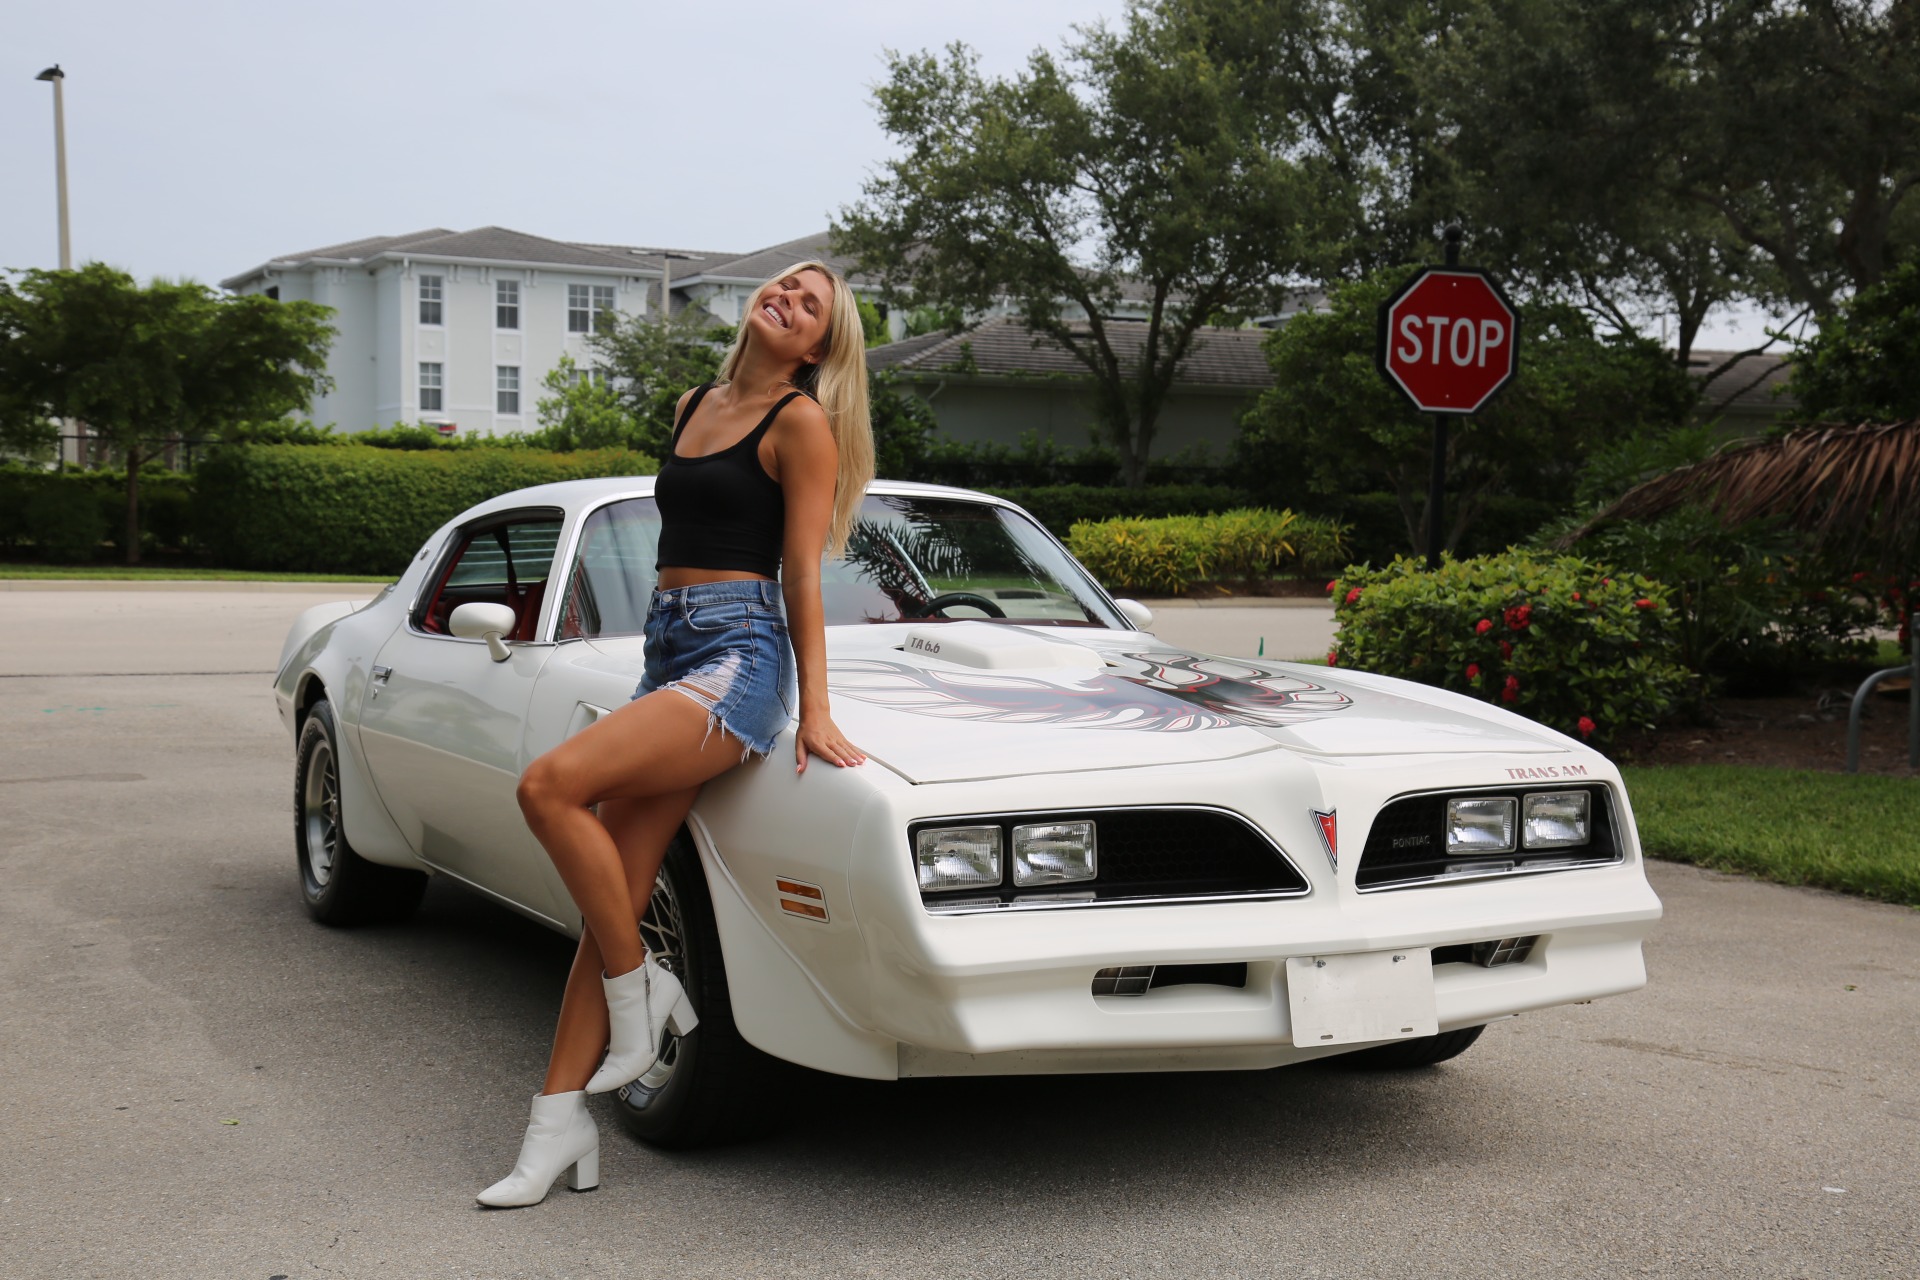 Used 1977 Pontiac Trans Am 6.6 400 CU INCH for sale Sold at Muscle Cars for Sale Inc. in Fort Myers FL 33912 3